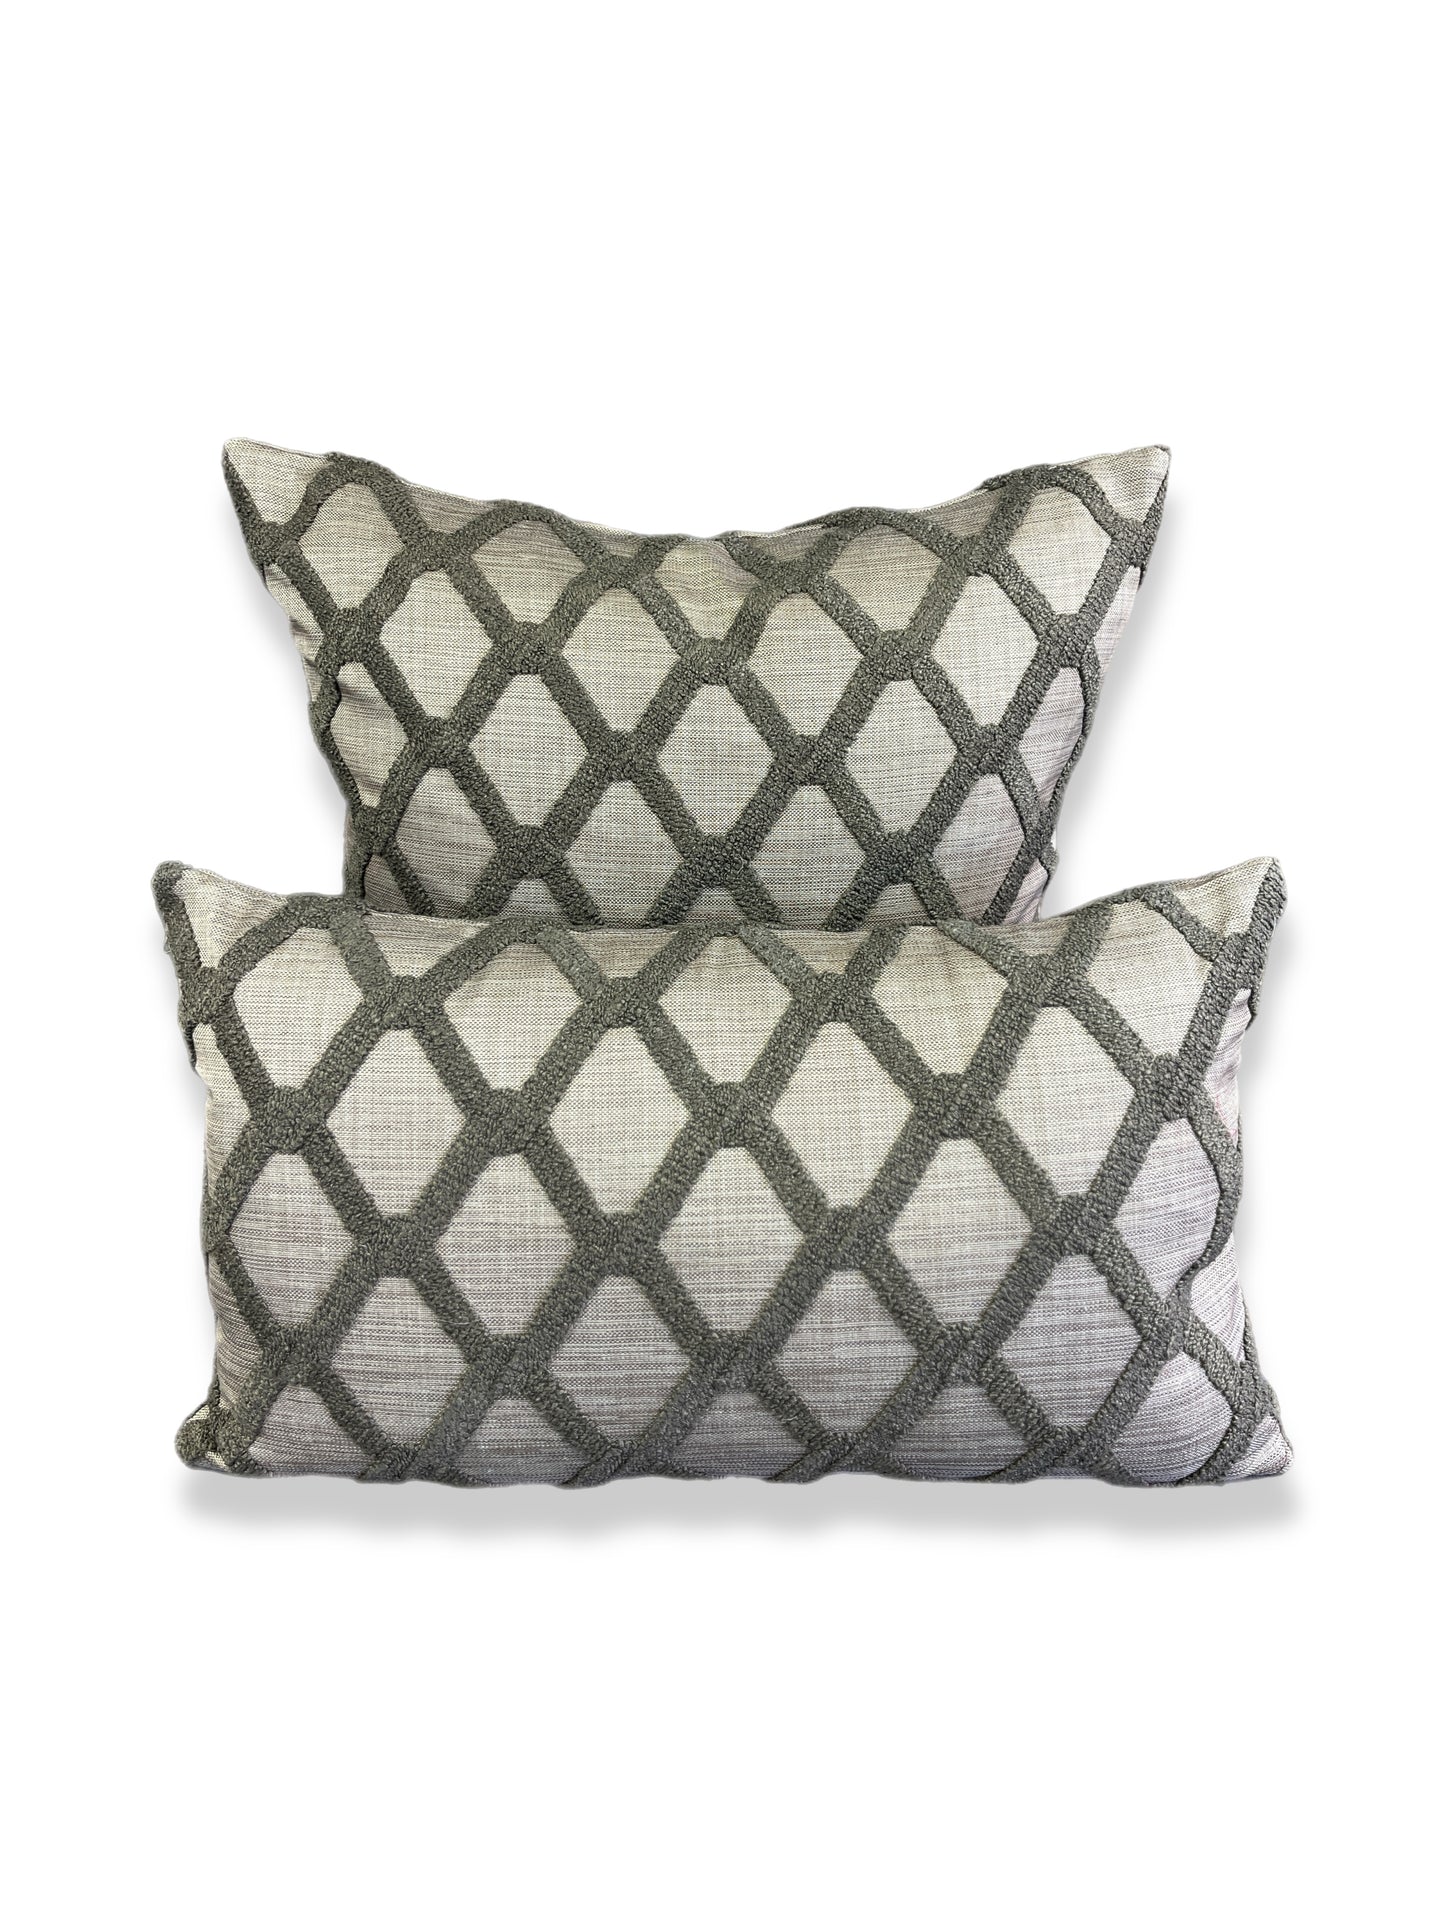 Luxury Lumbar Pillow - 24” x 14” - Mocha Dream; mocha brown textural geometric patterns on top of a dreamy taupe woven background